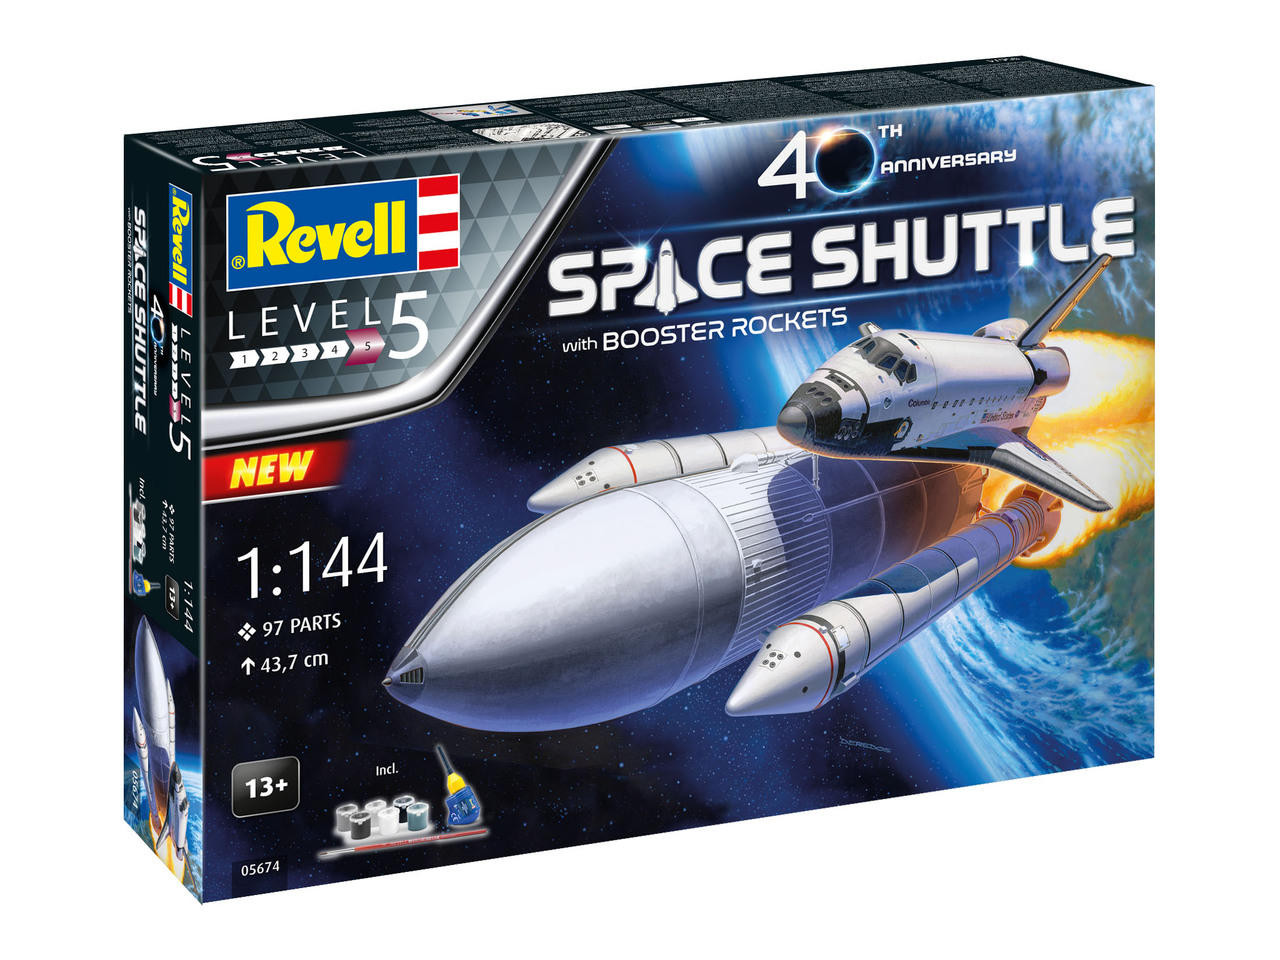 RMG5674 1/144 Revell Space Shuttle and Boosters 40th Anniversary Plastic Model Kit 05674 MMD Squadron